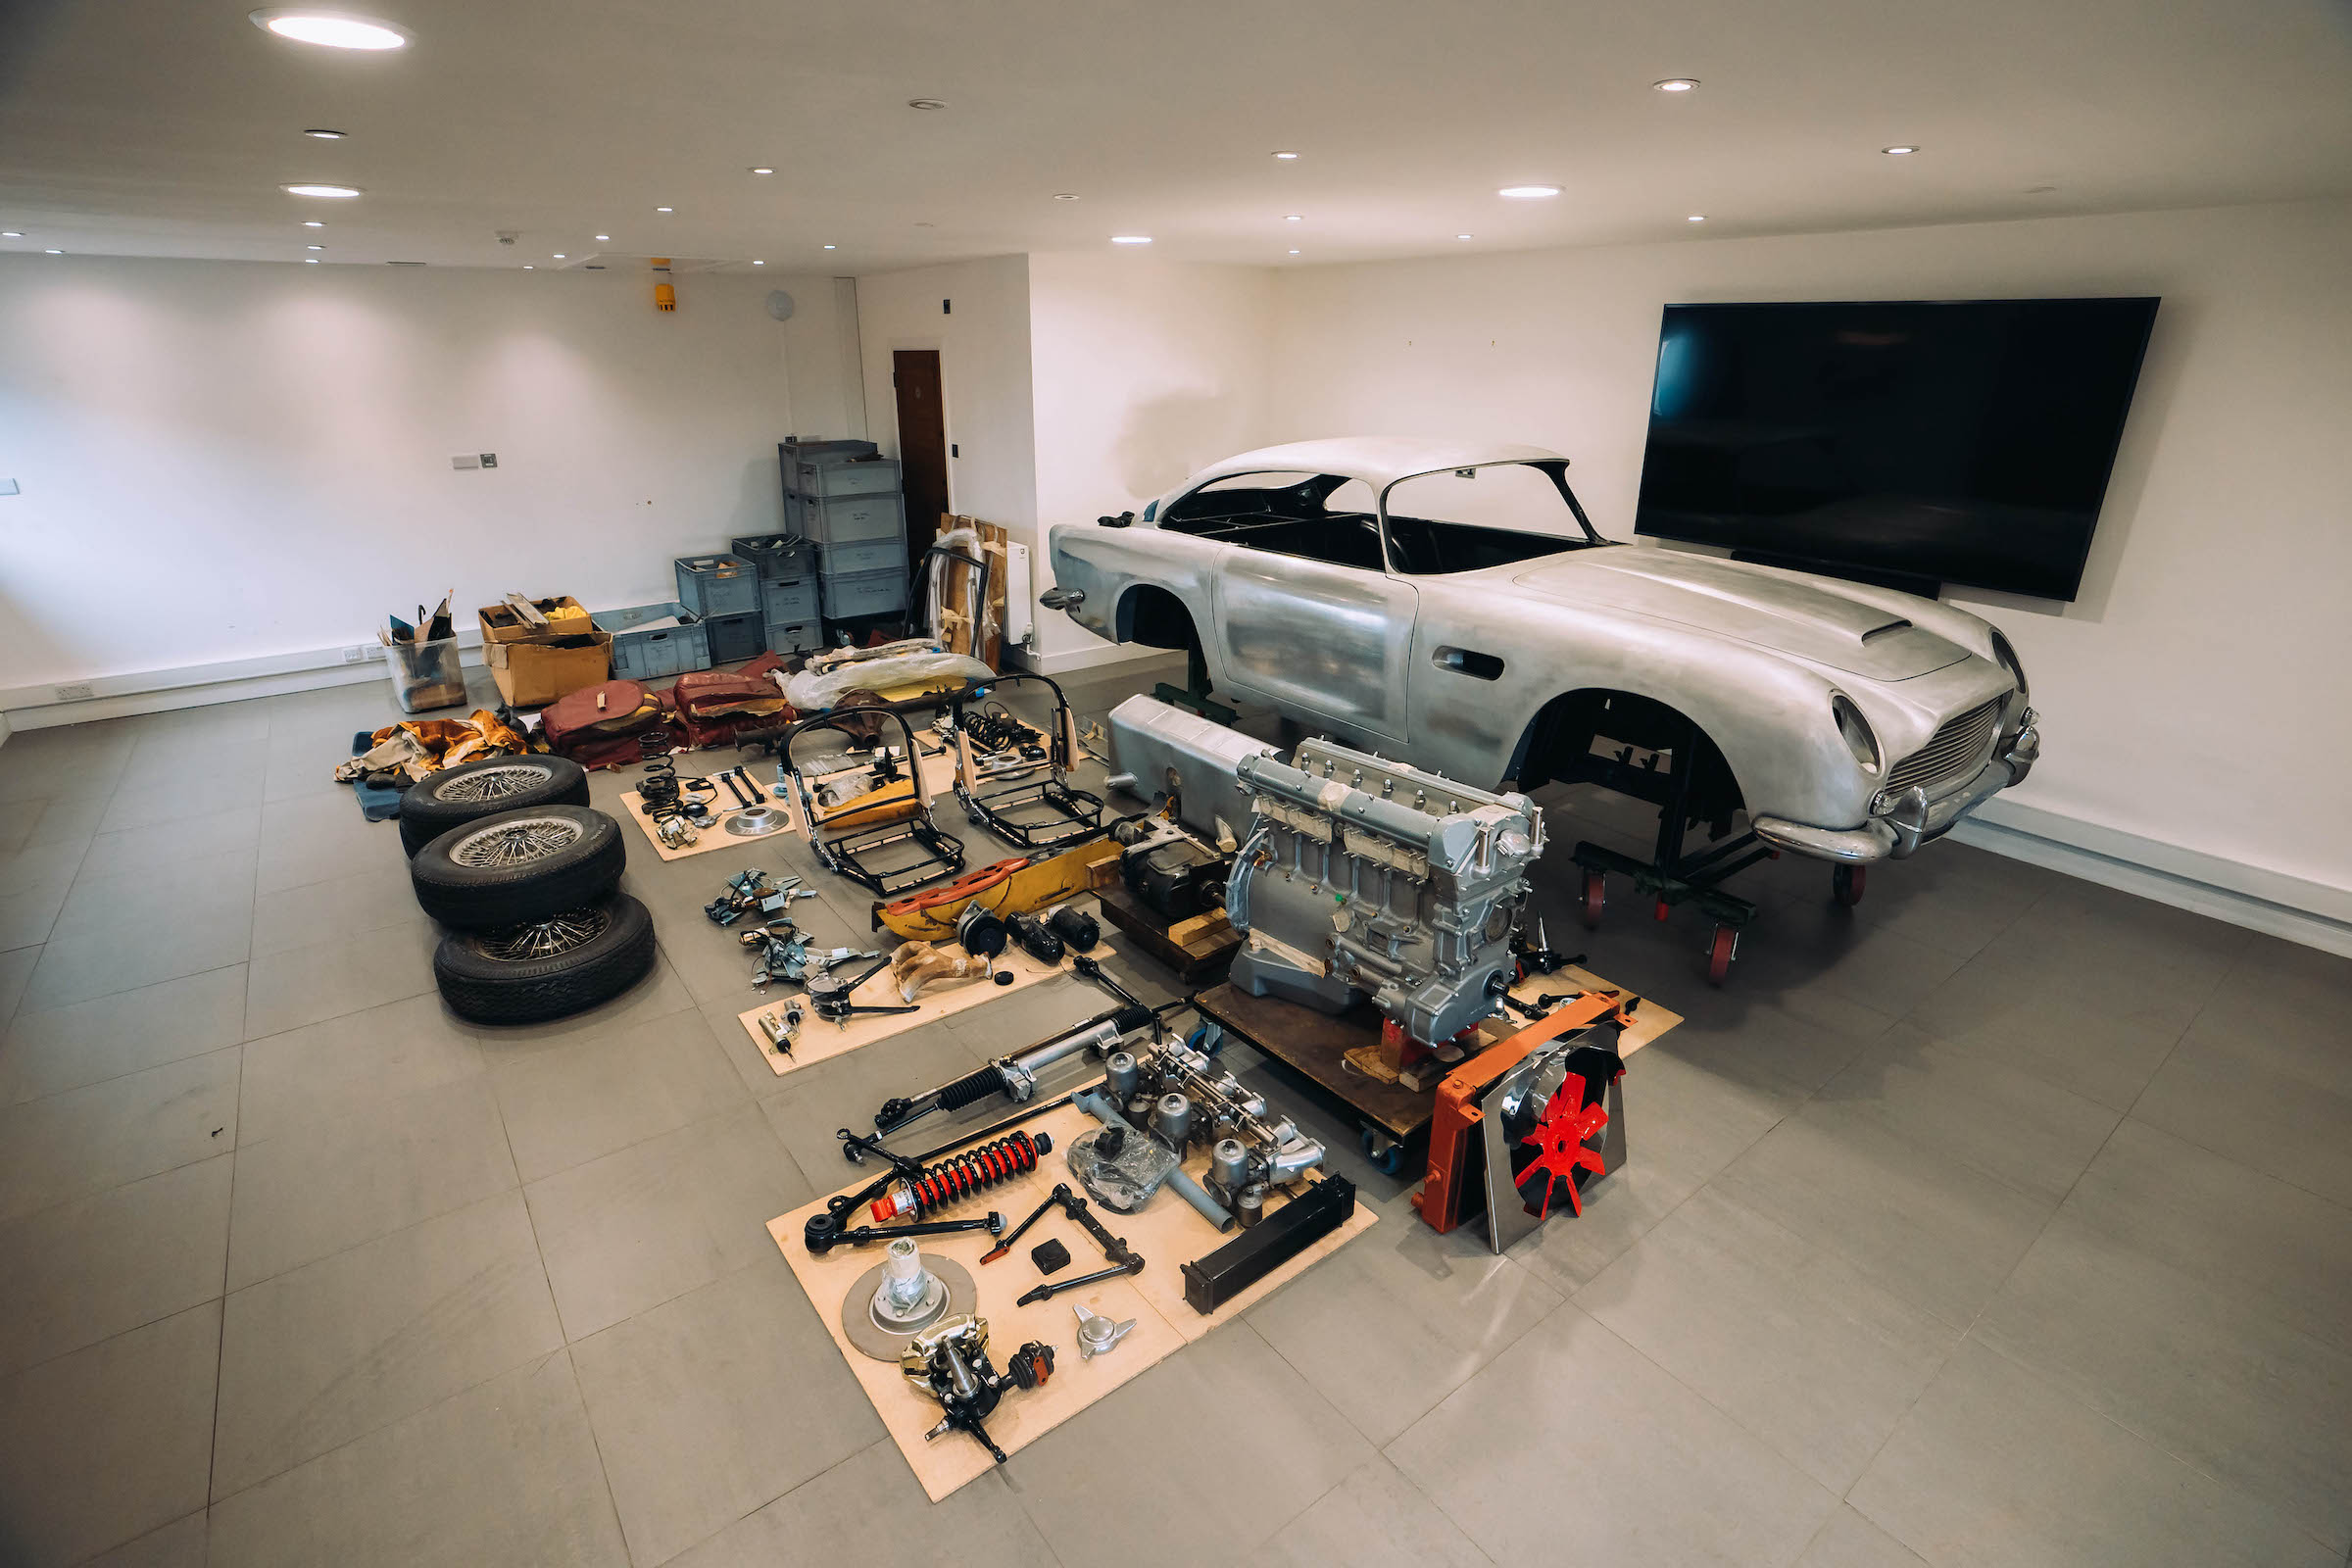 This disassembled DB5 is the world's best Airfix kit